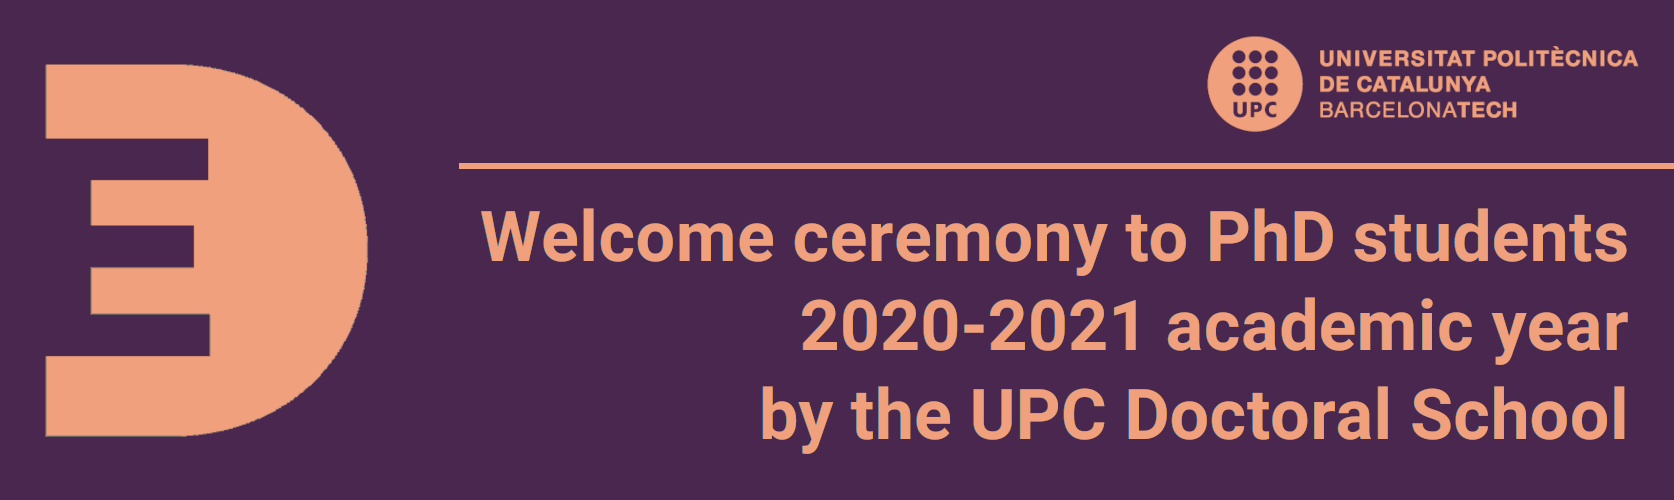 welcome_ceremony3.png